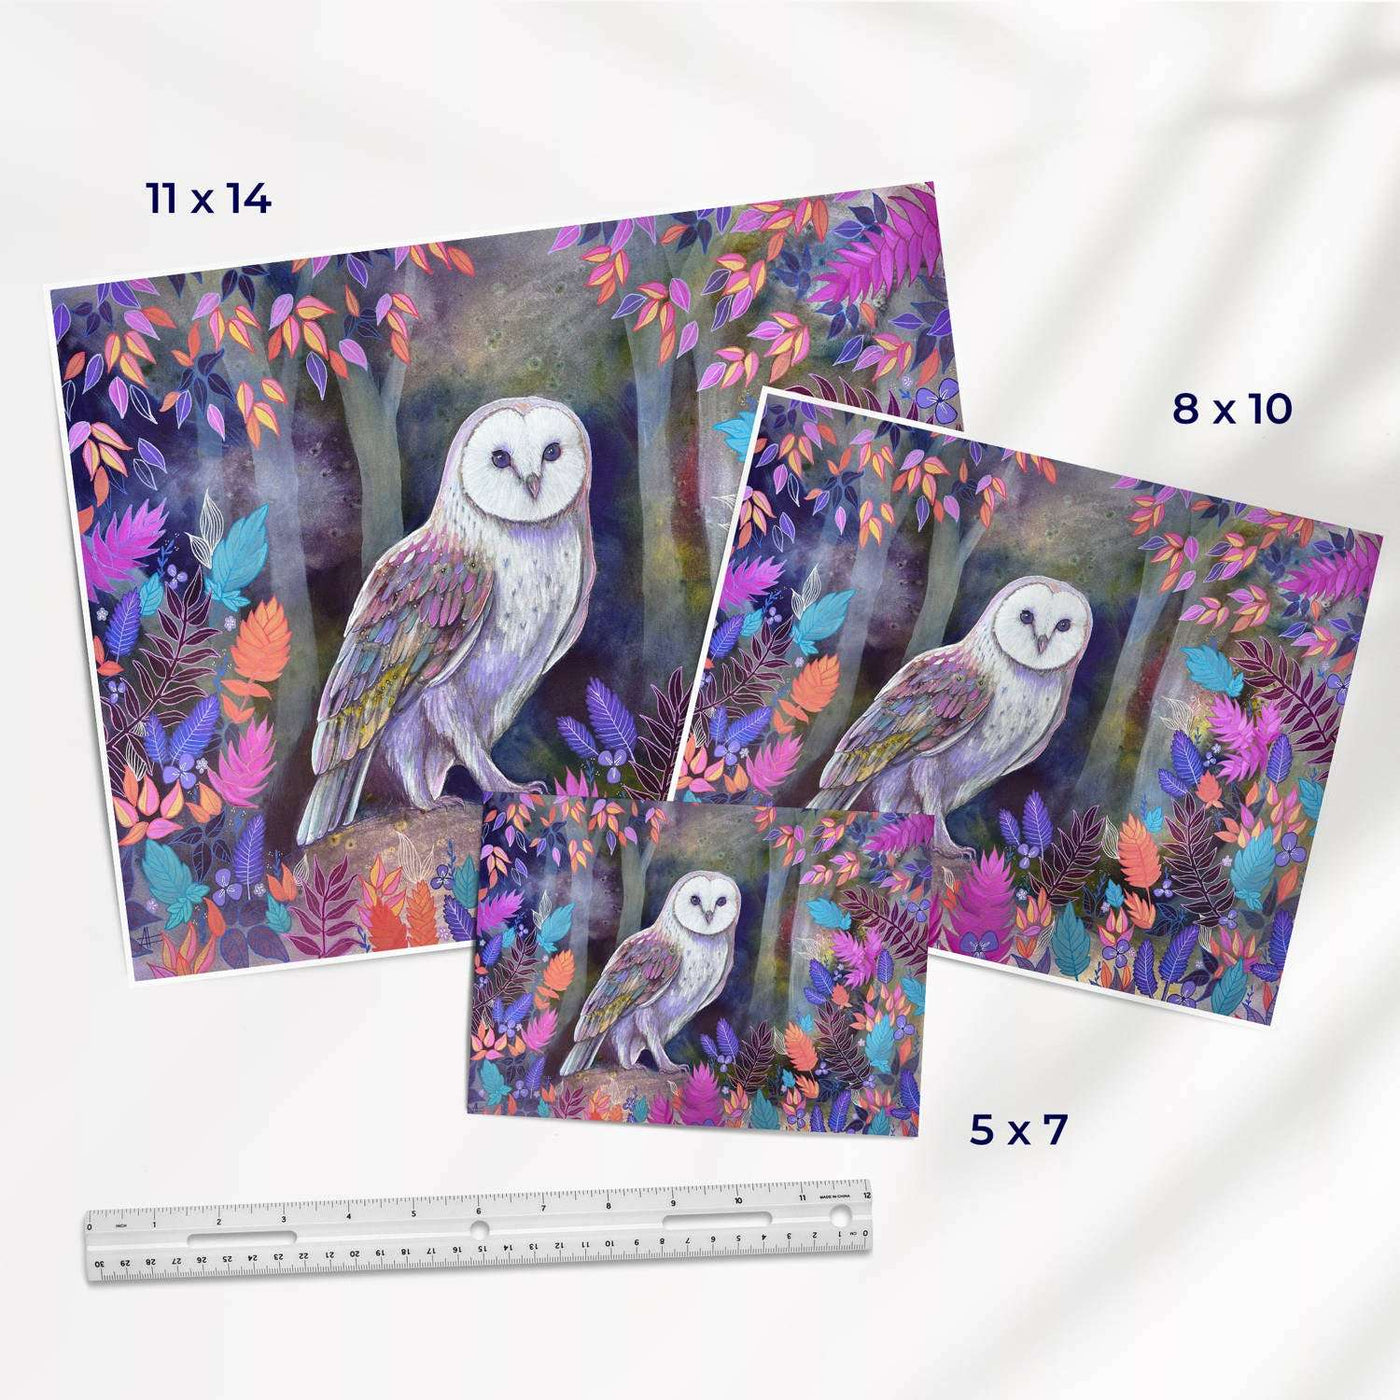 Print series of an owl with colorful leaves available in multiple sizes alongside a ruler.